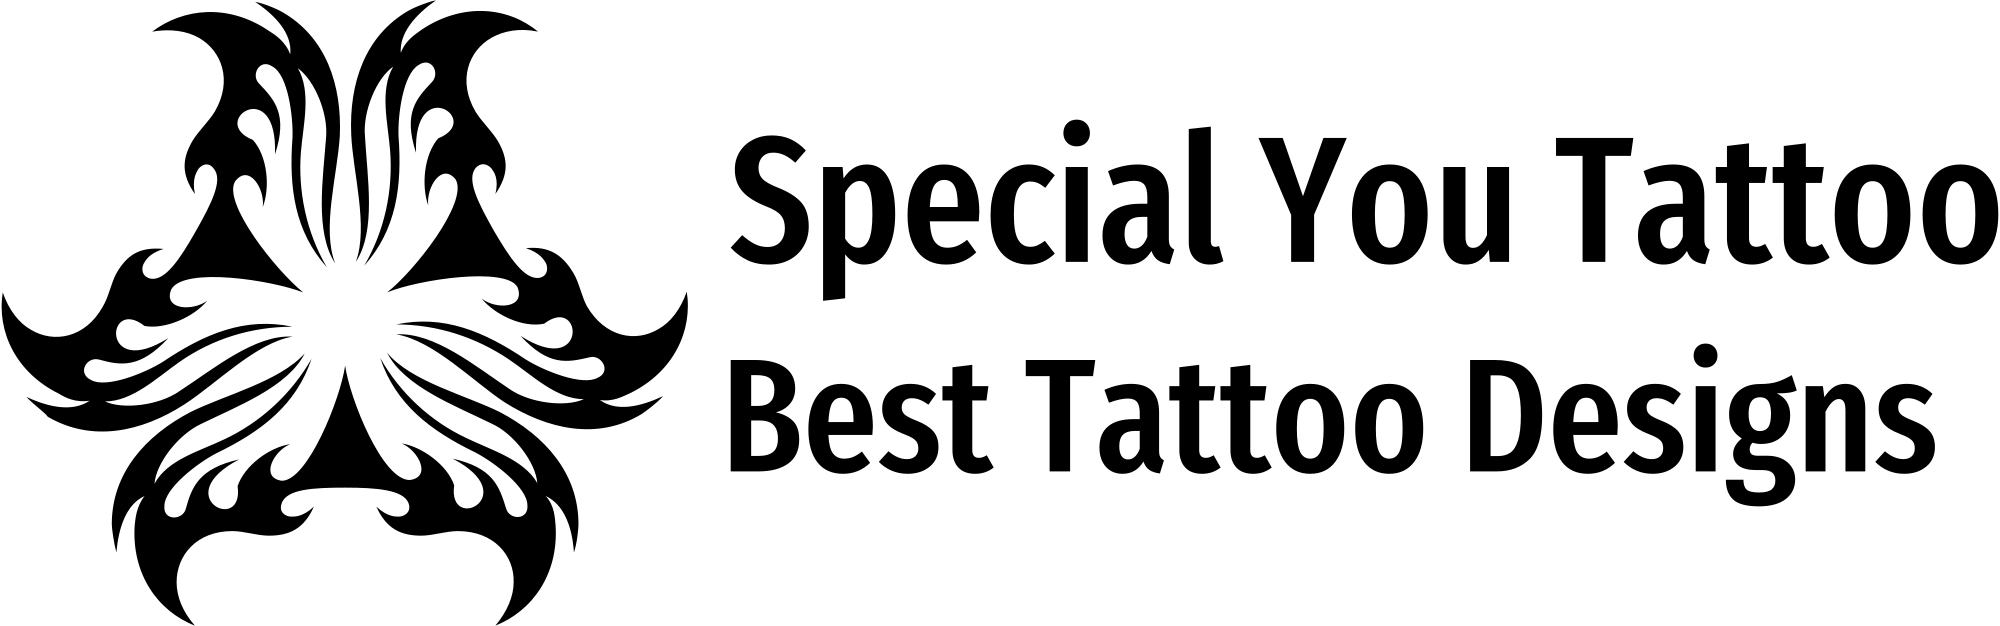 Special You Tattoo